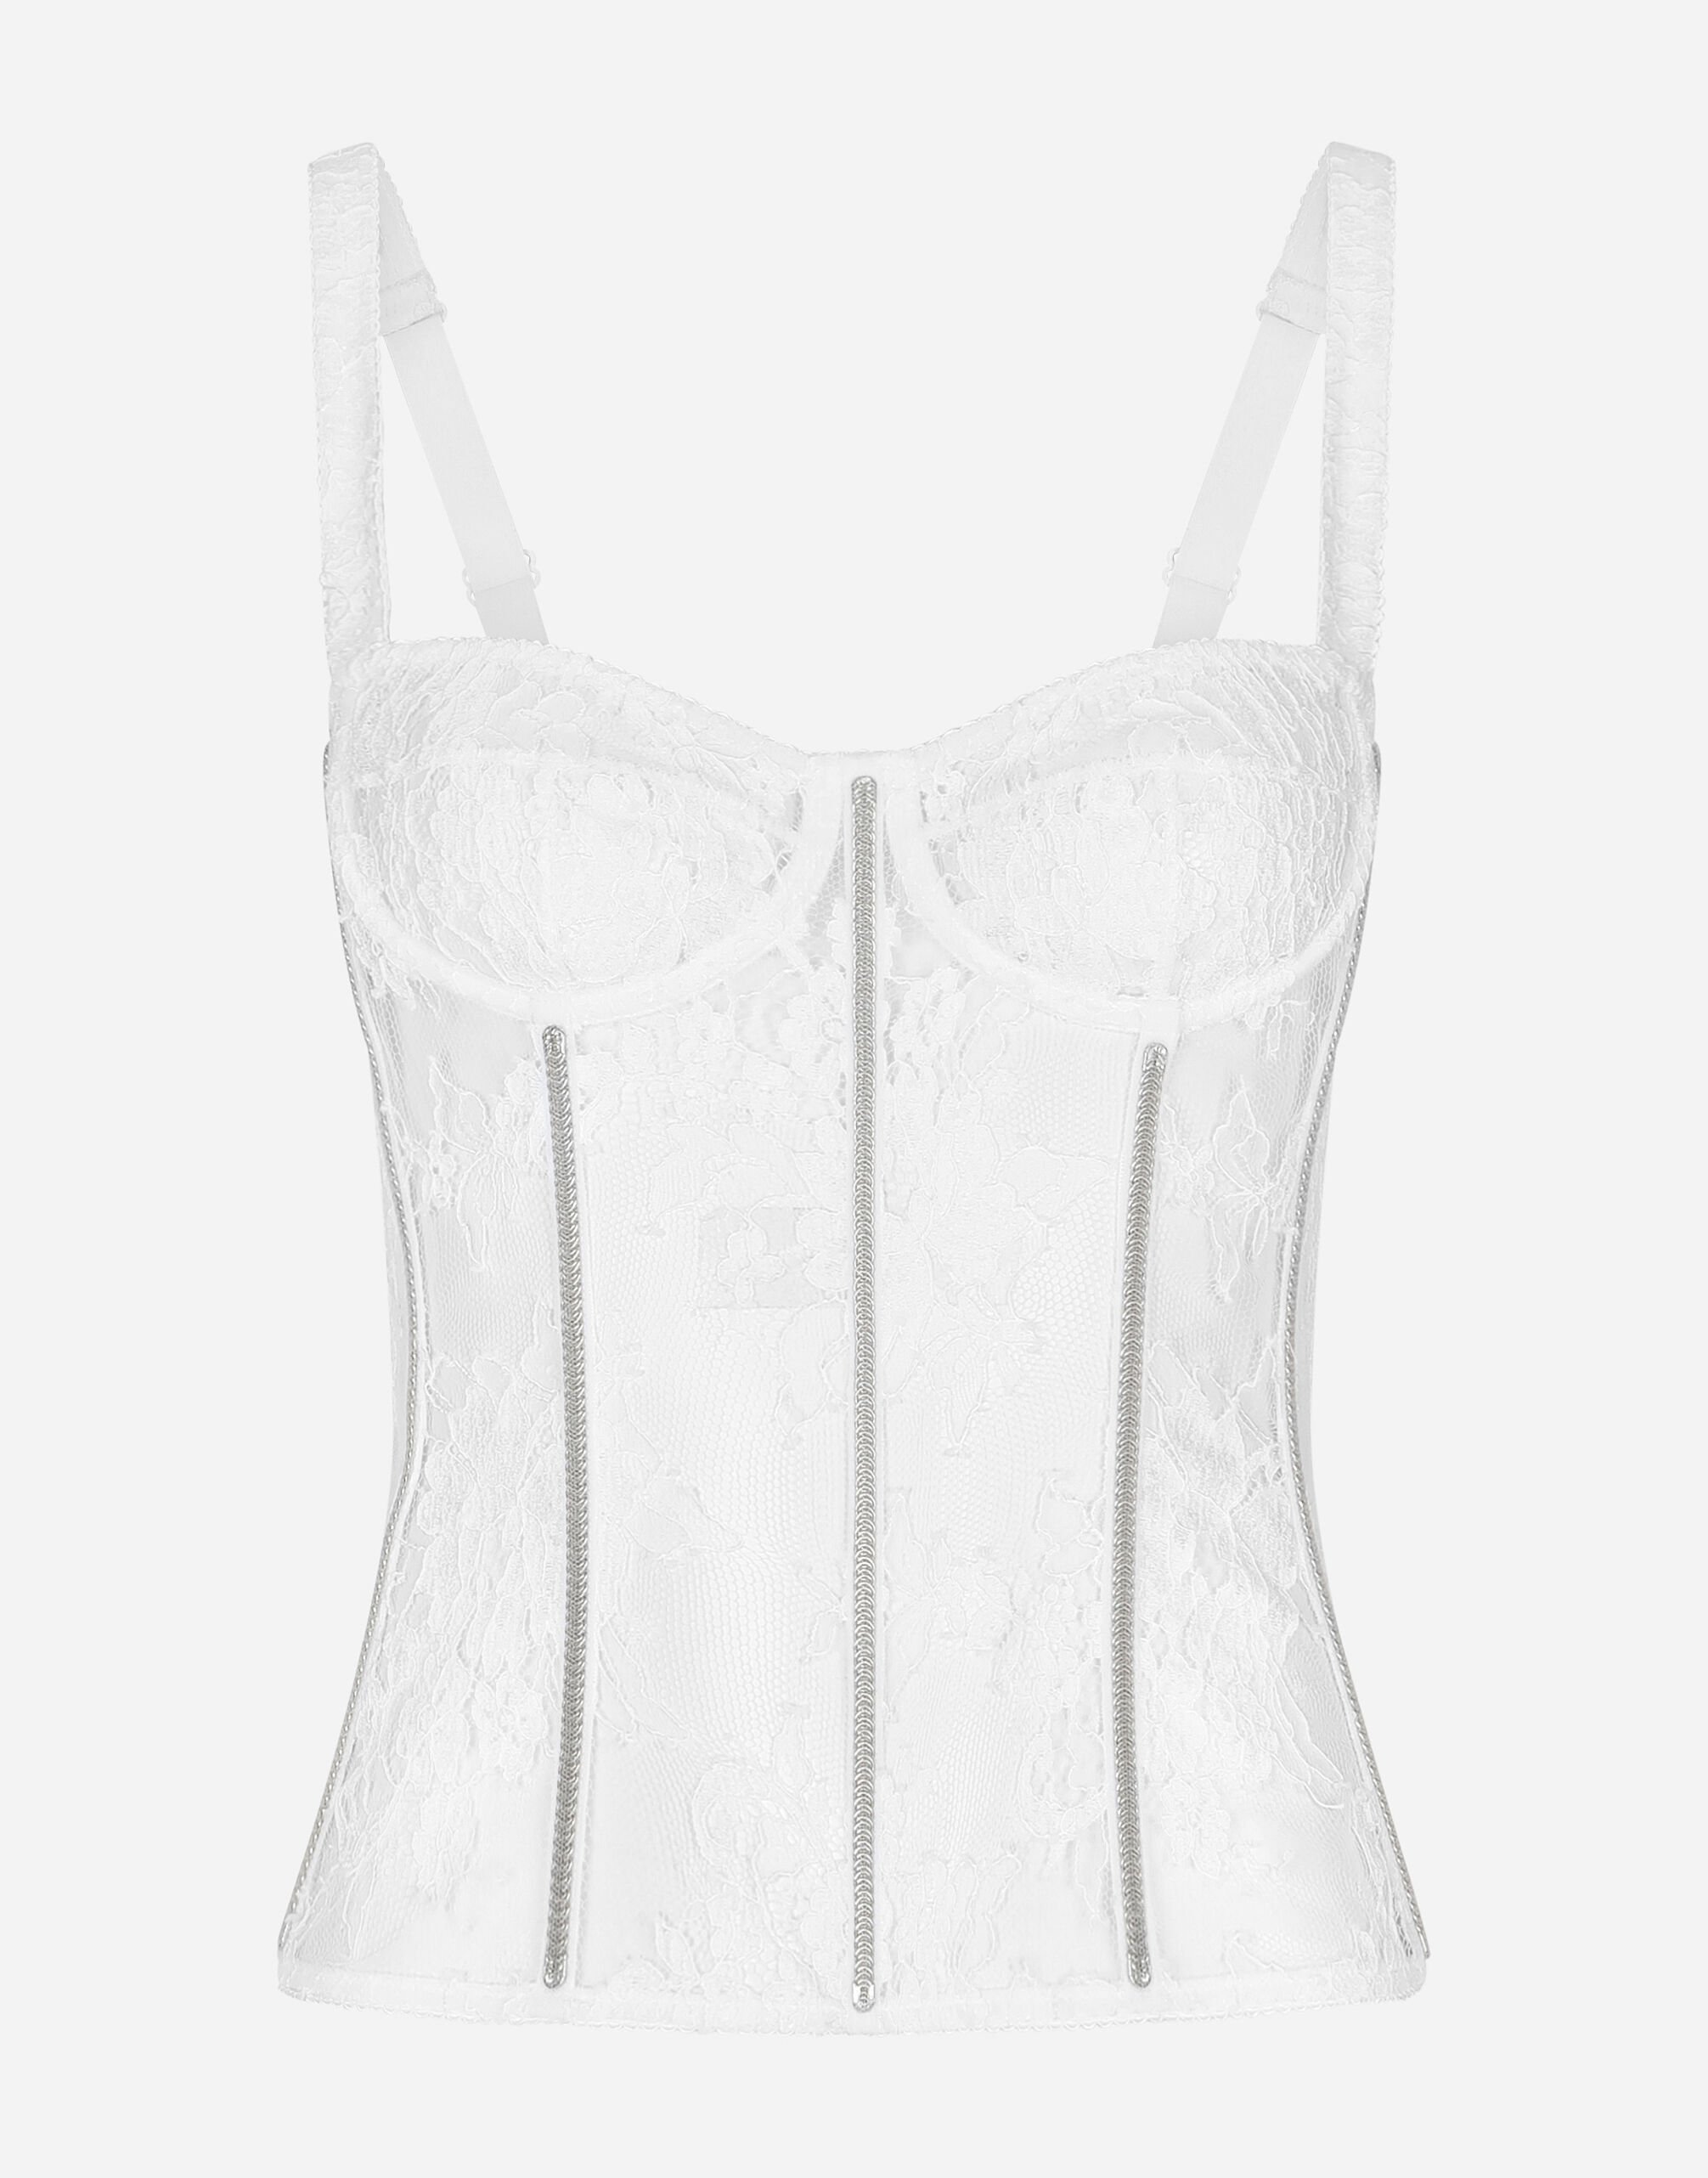 Dolce & Gabbana Lace lingerie bustier with straps White CK1563B5845